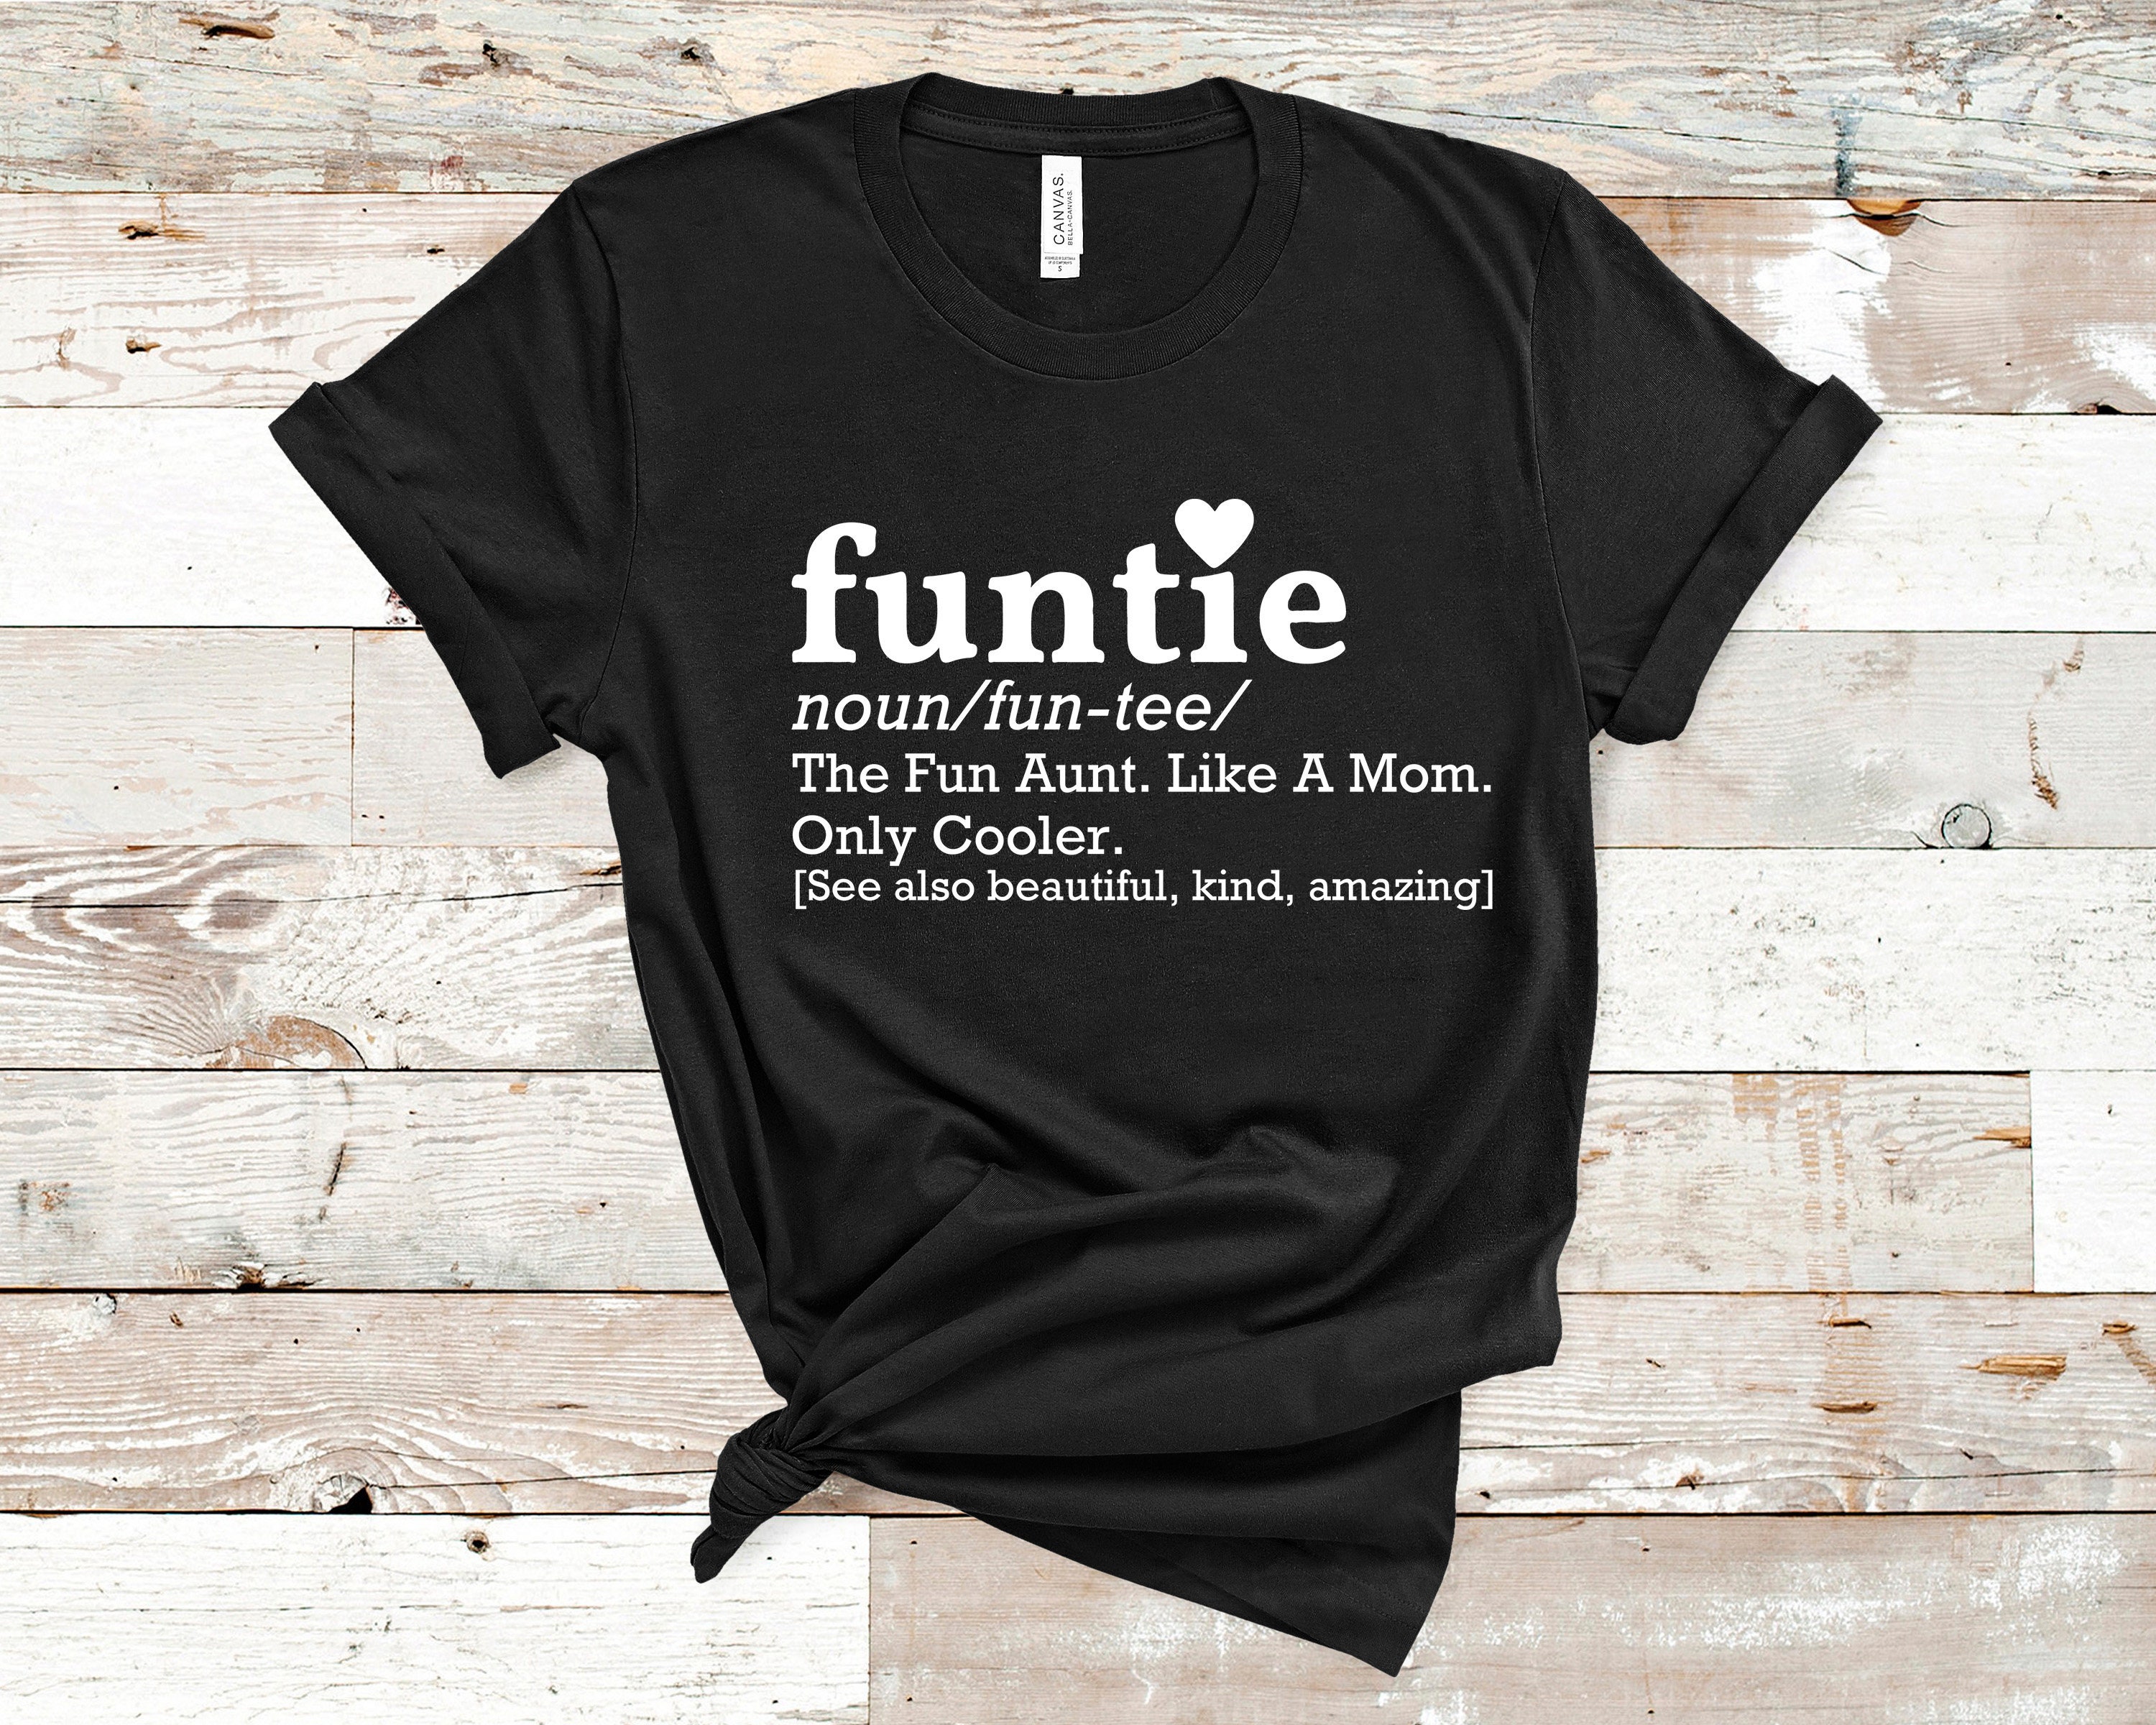 Funtie Shirt Shirts for Aunts Funny Aunt Shirts Favorite - Etsy